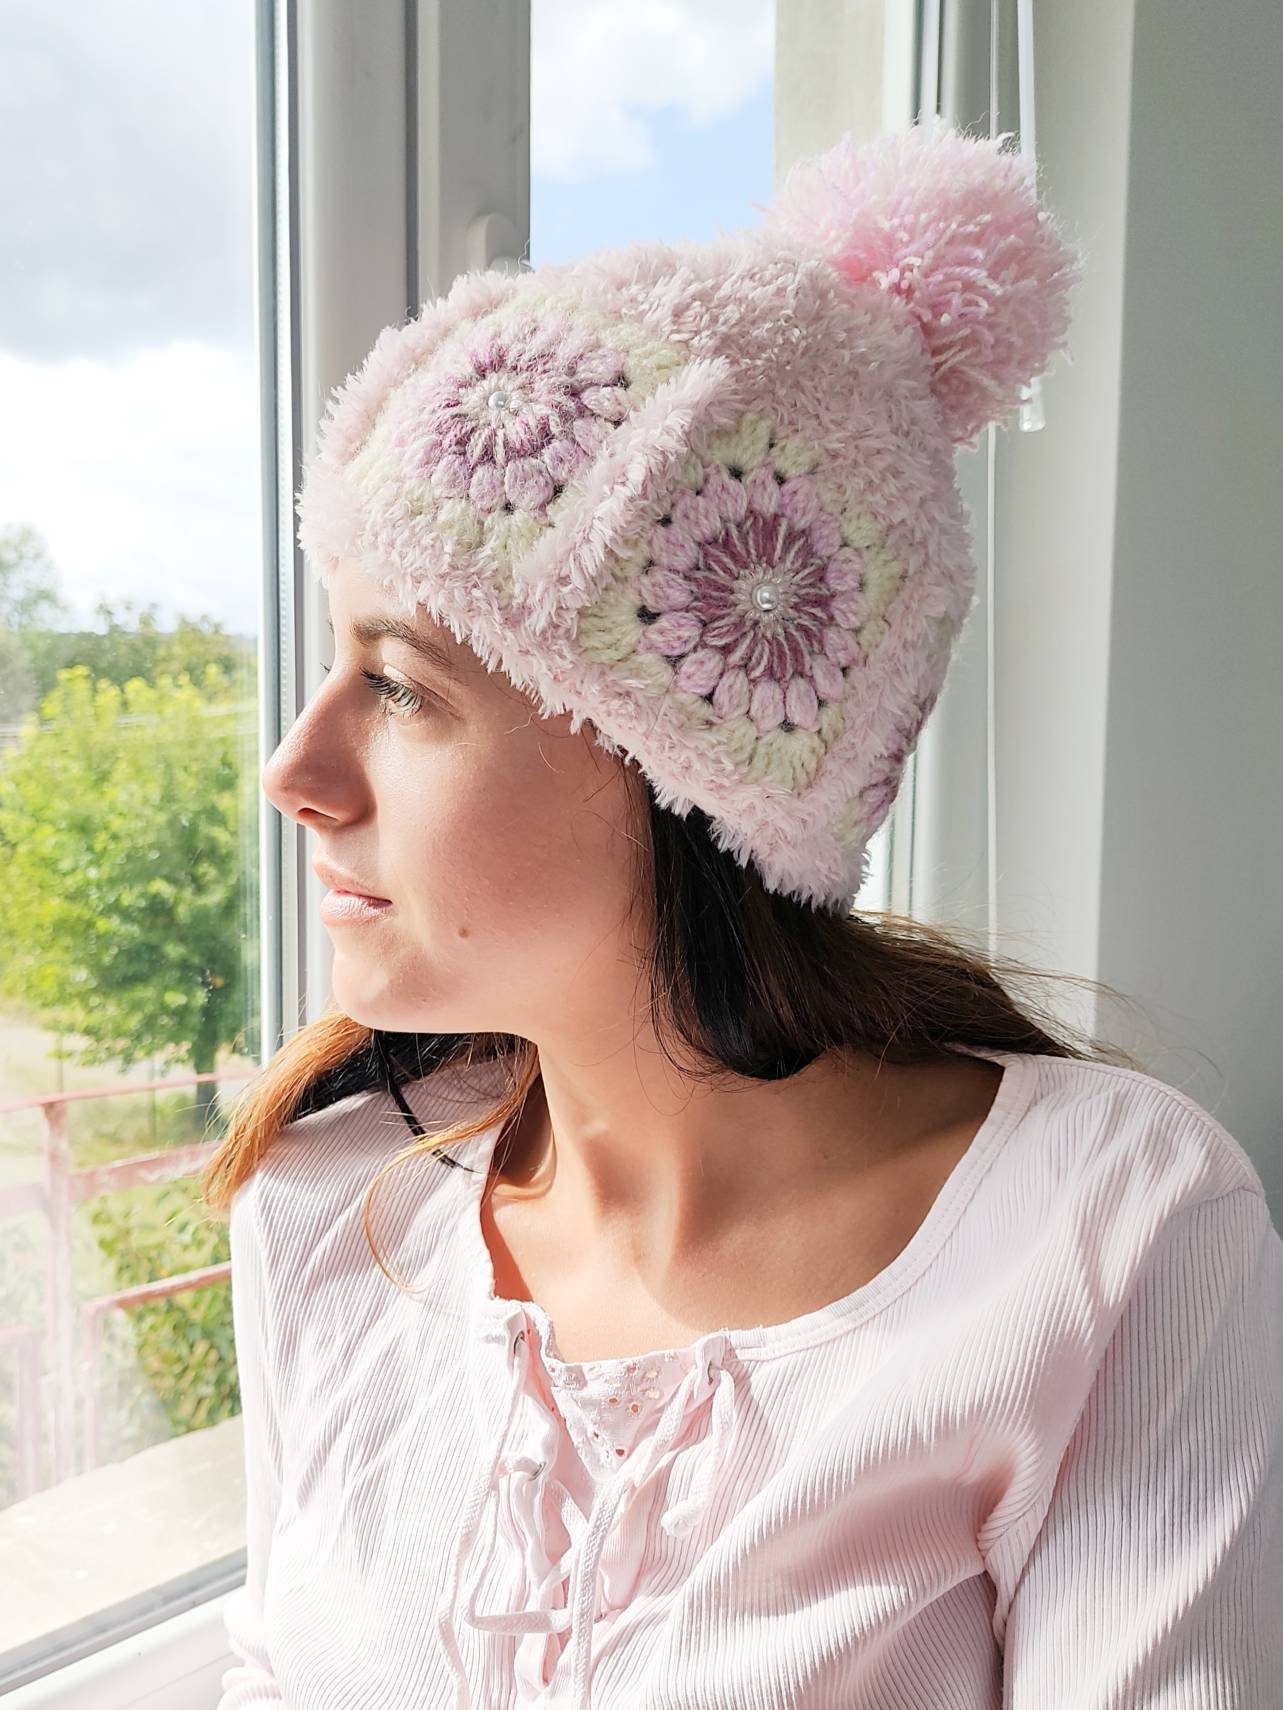 Designer Granny's Square Beanie Hat in Baby Pink and White -  Denmark